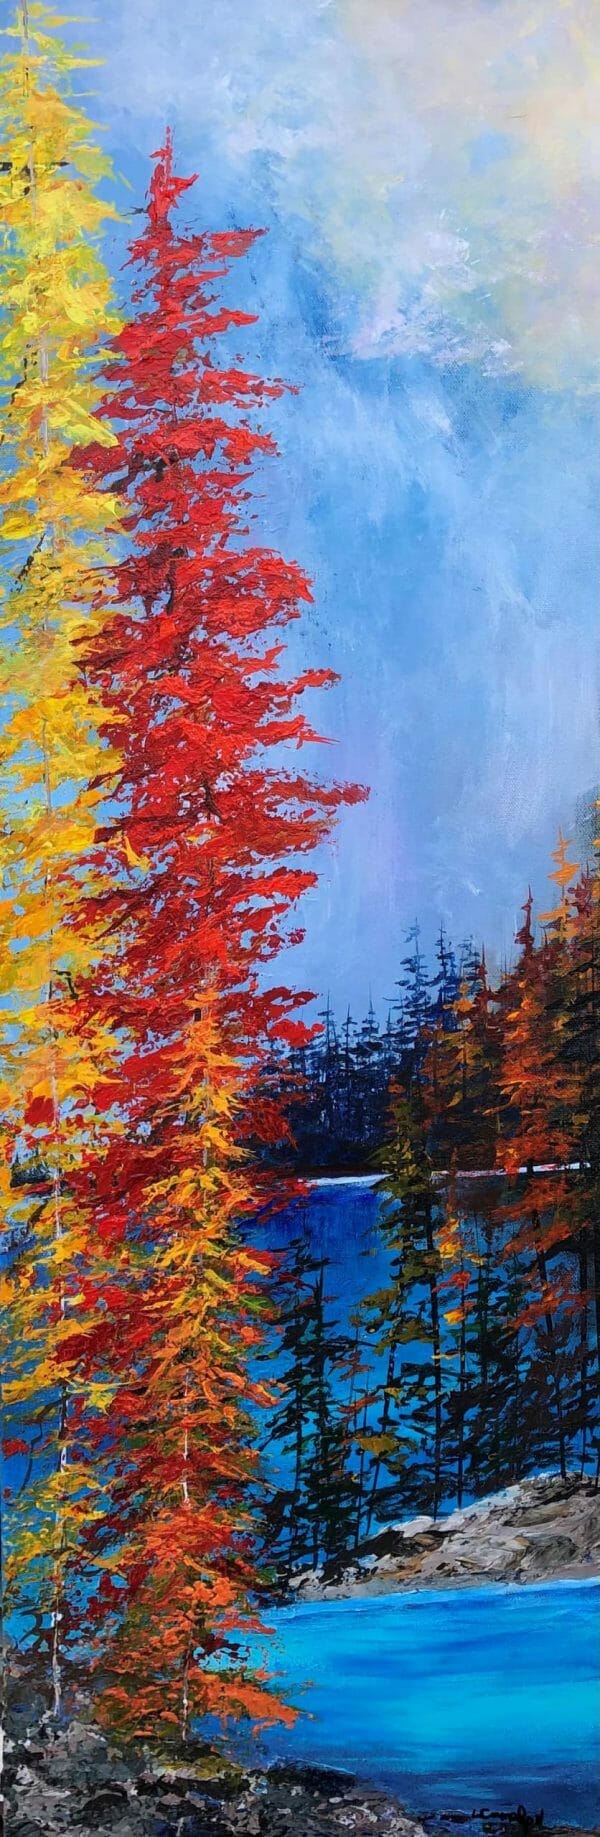 Altered Reality - Canadian Original Artwork For Sale by Lynn Cameron - Calgary, AB Local Artist - Nature